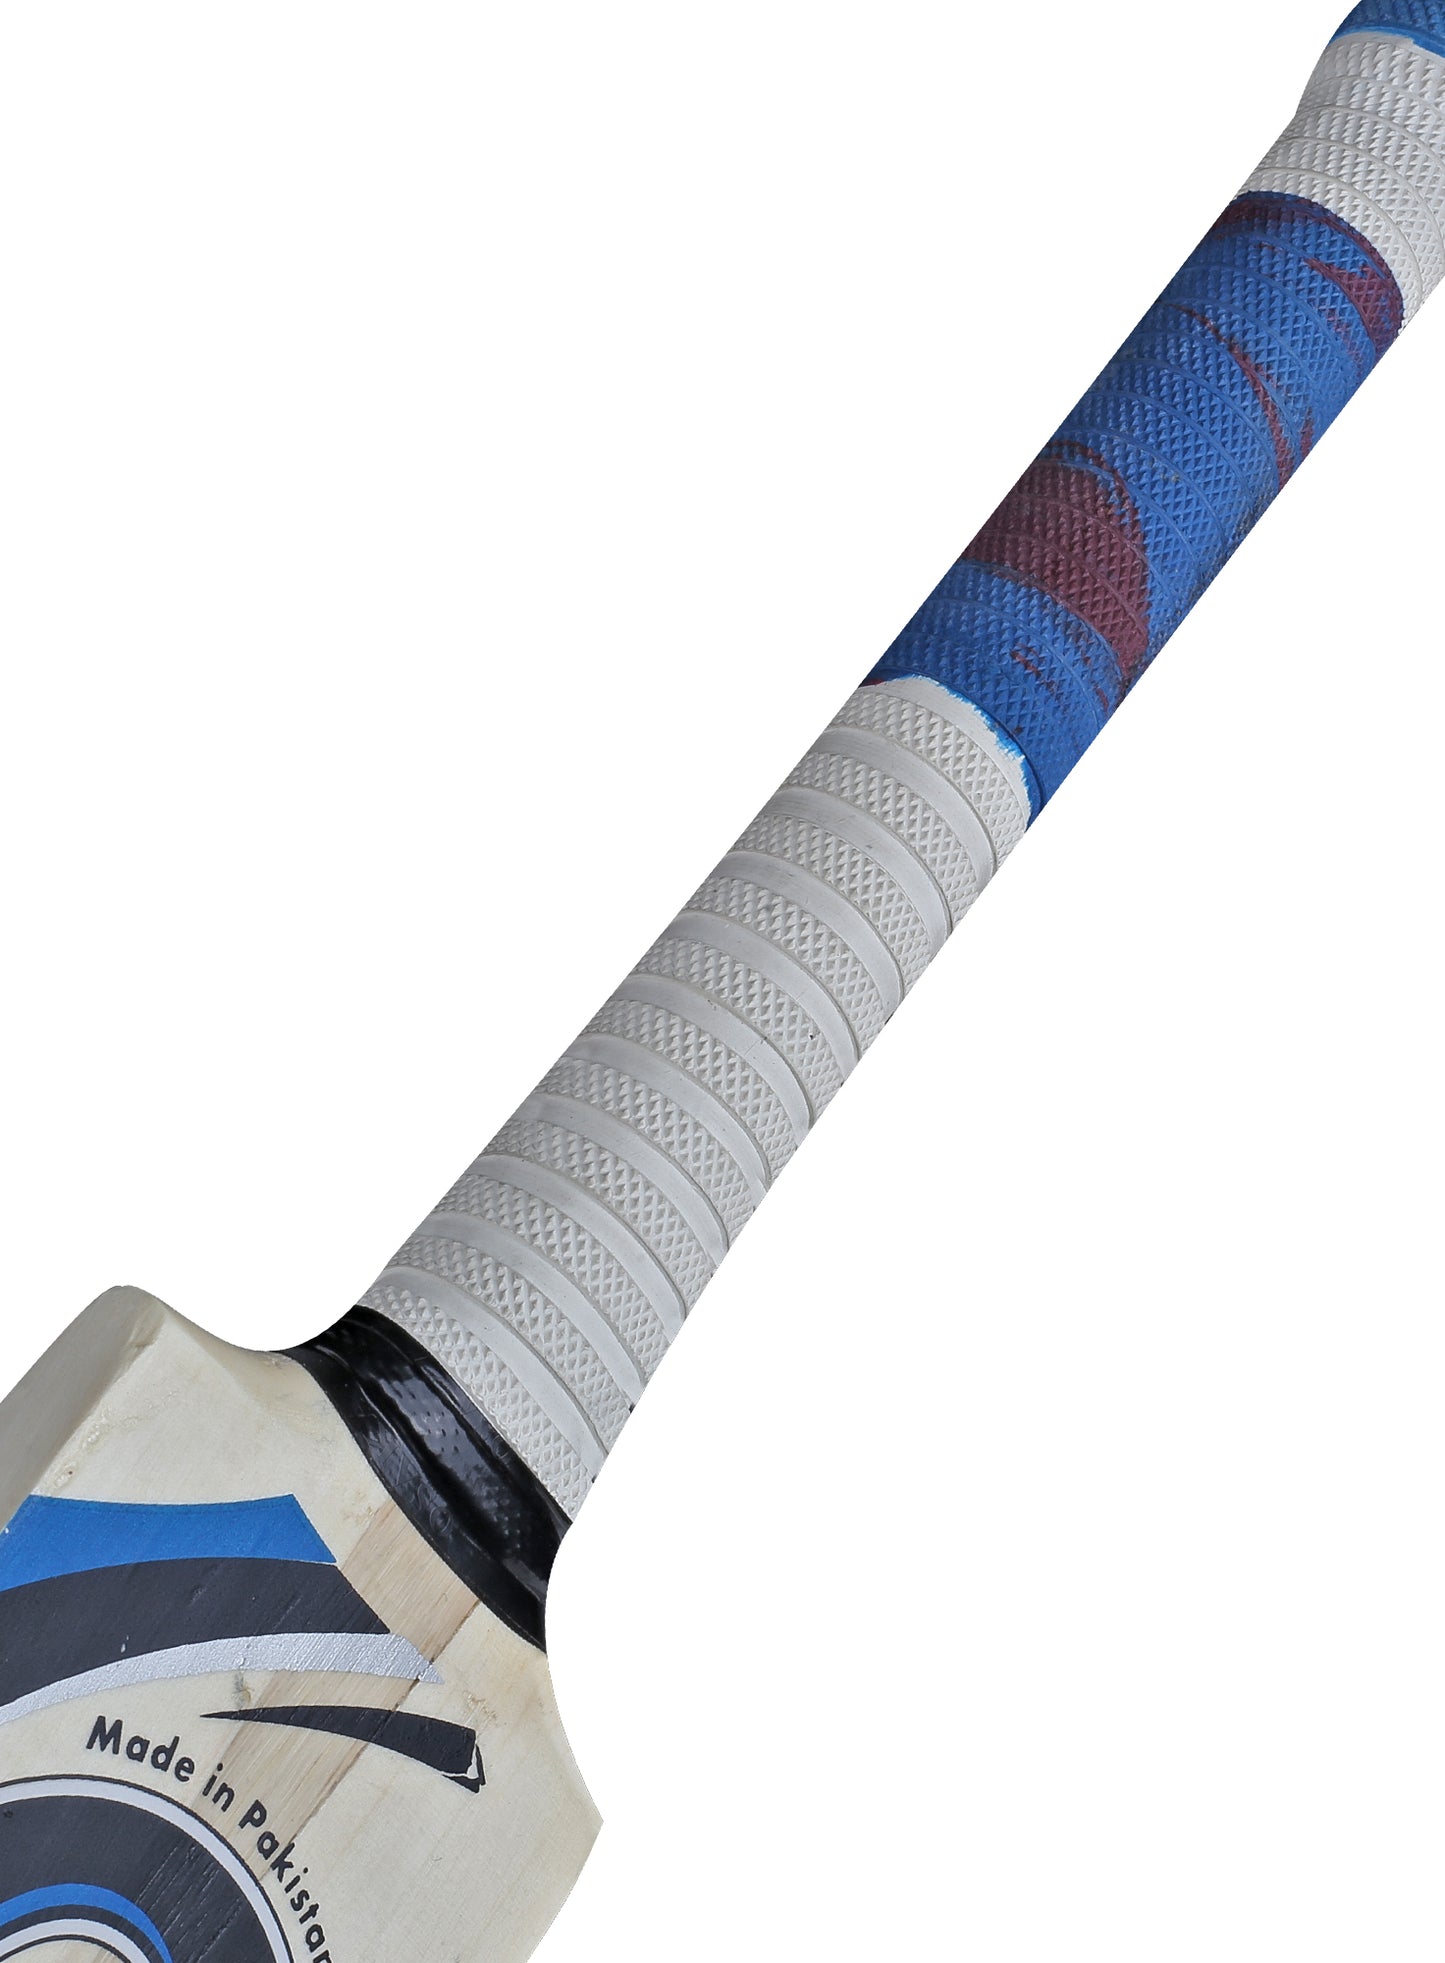 CA White-Tiger tennis ball cricket bat with Power-Tek technology, handcrafted from popular willow for heavy hitters, featuring a thick middle, lightweight design, and a double-colored camo grip.